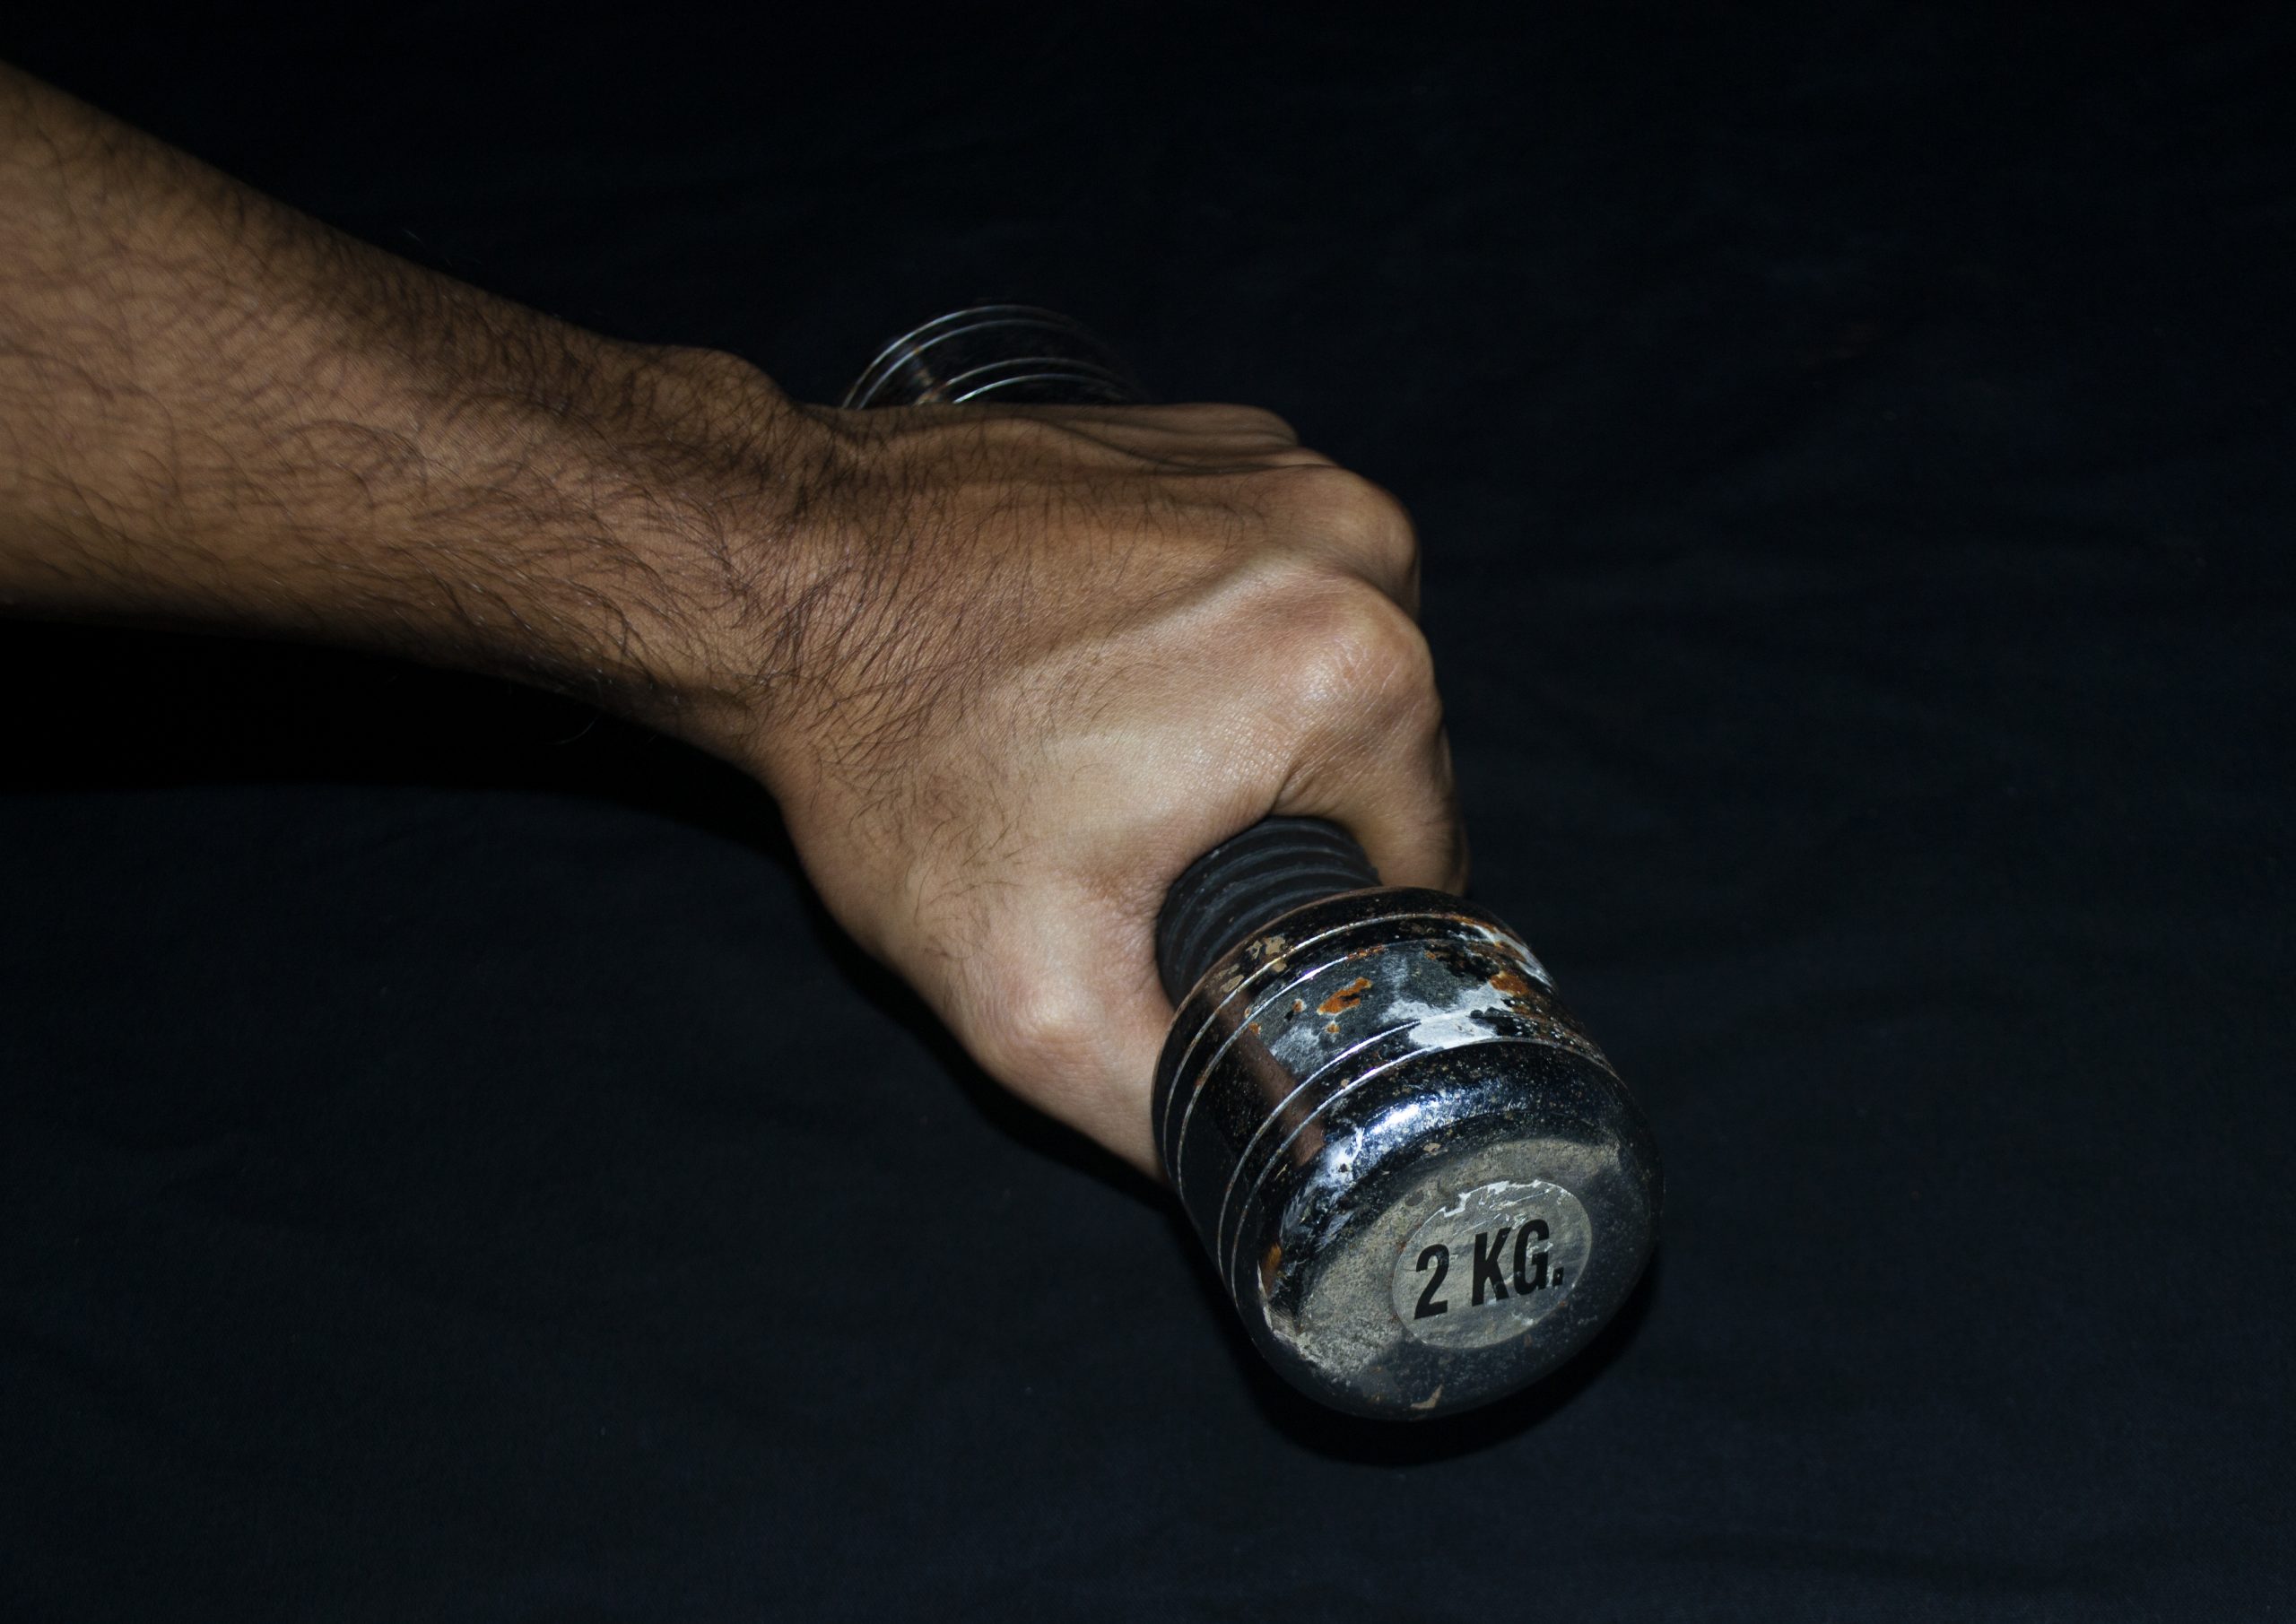 Holding a dumbbell